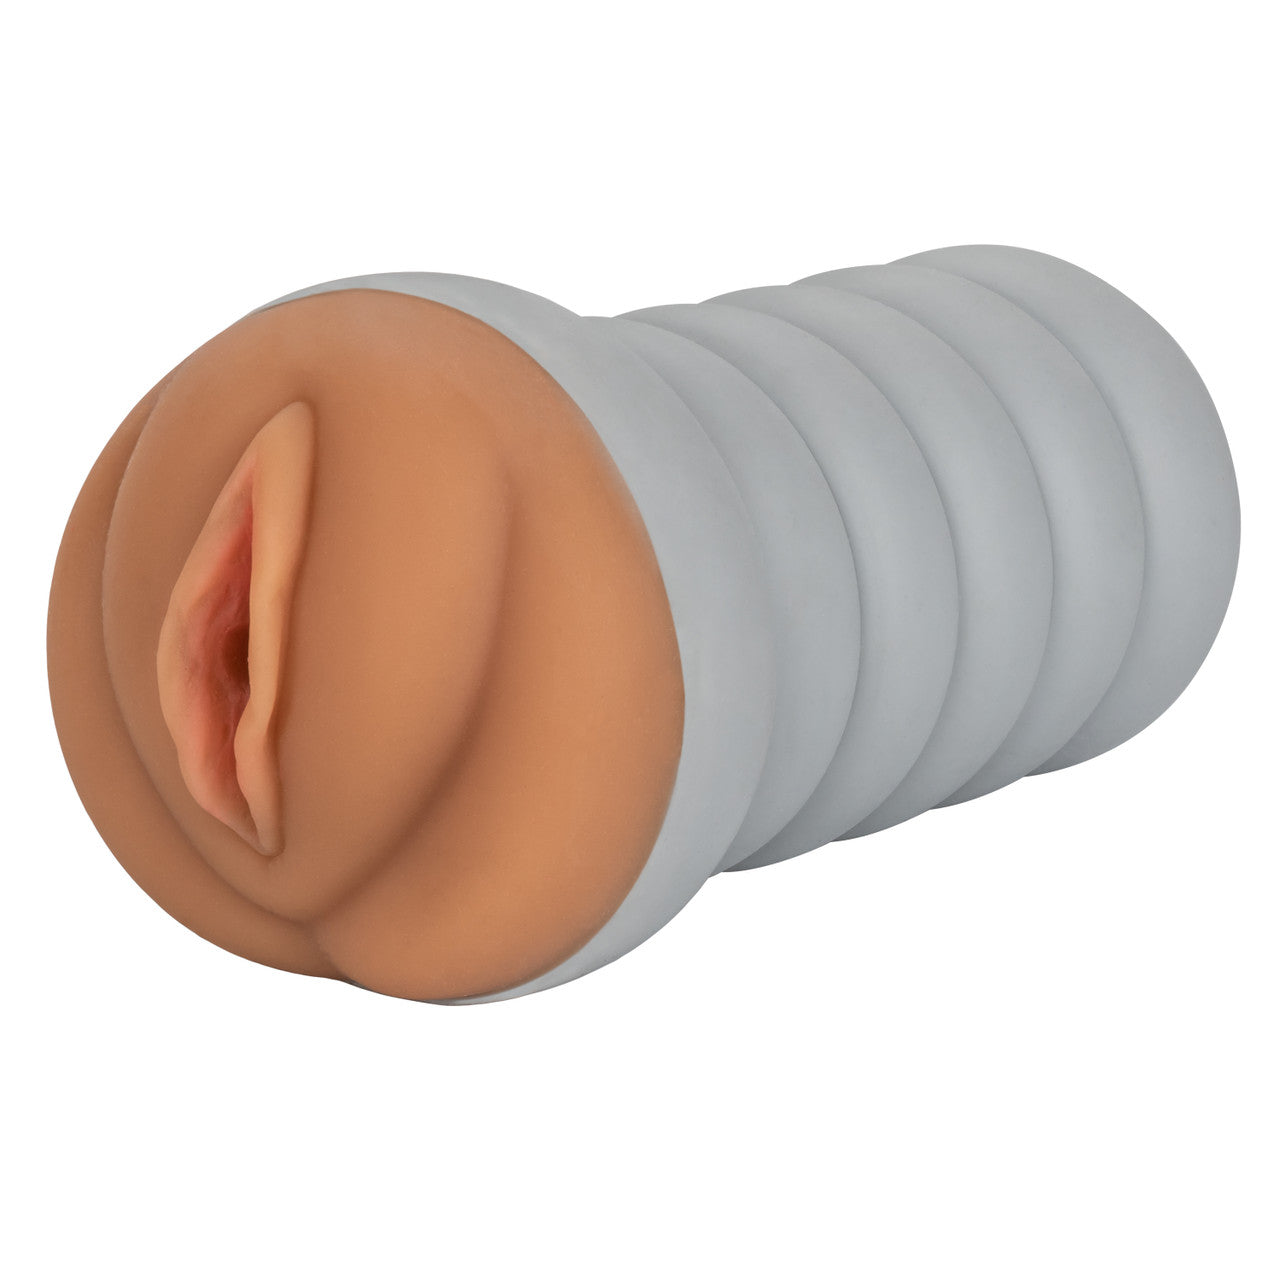 Ribbed Gripper™ Tight Pussy Grip - Brown